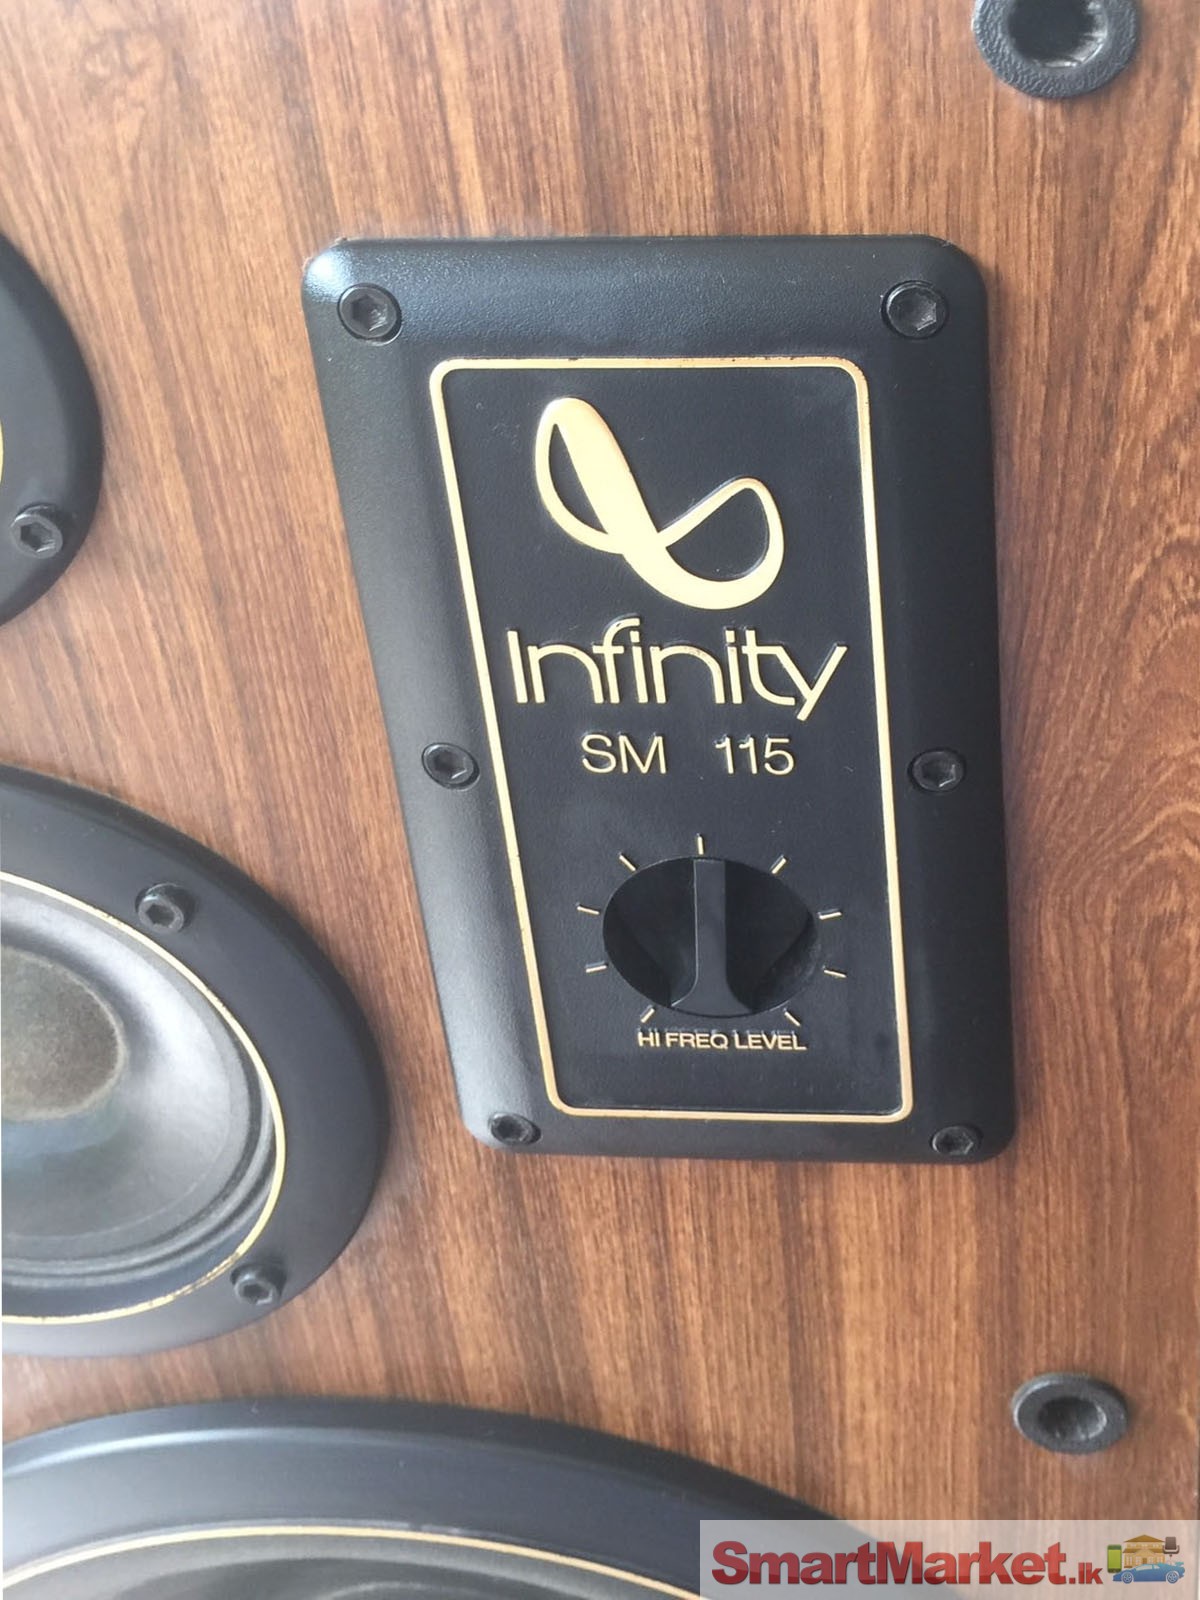 INFINITY SPEAKERS FOR SALE